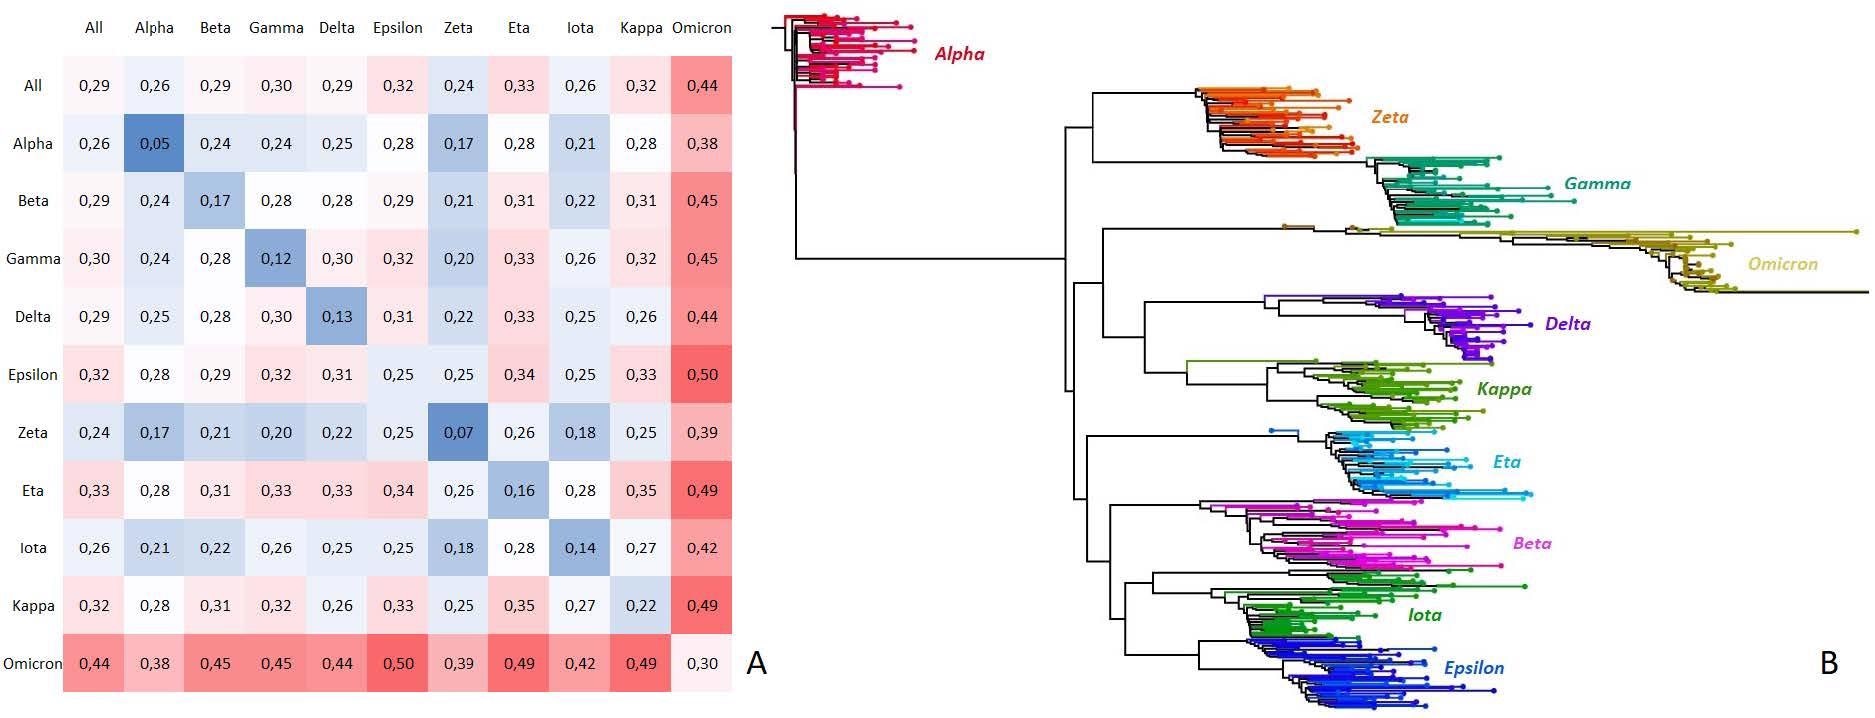 Nucleotide rate dissimilarity matrix and phylogenetic tree of SARS-CoV-2 variant families.